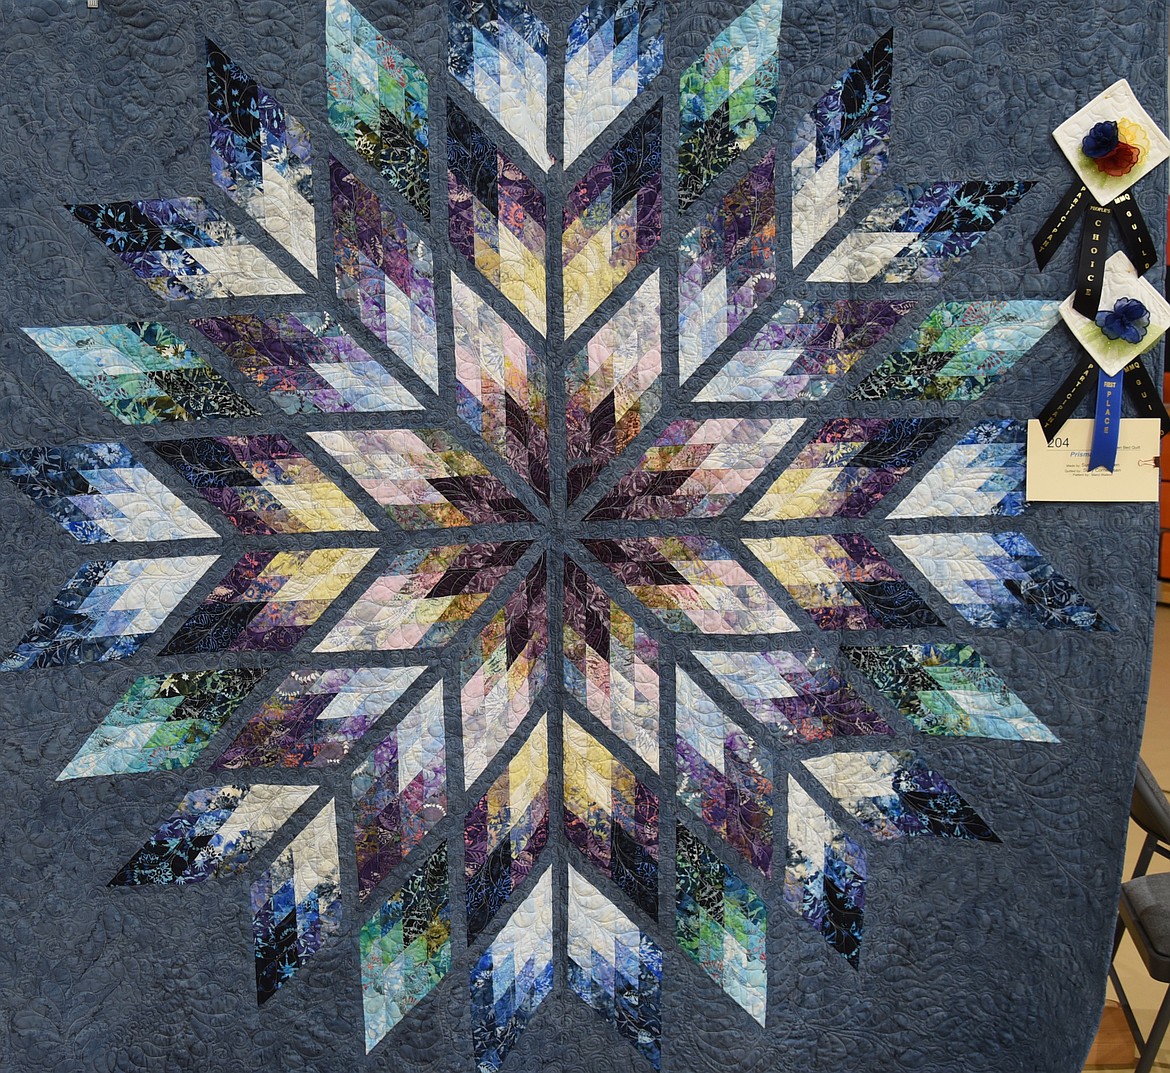 Susy Corneliusen’s quilt titled Prismatic Star won Best in Show. (Marla Hall/Lake County Leader)